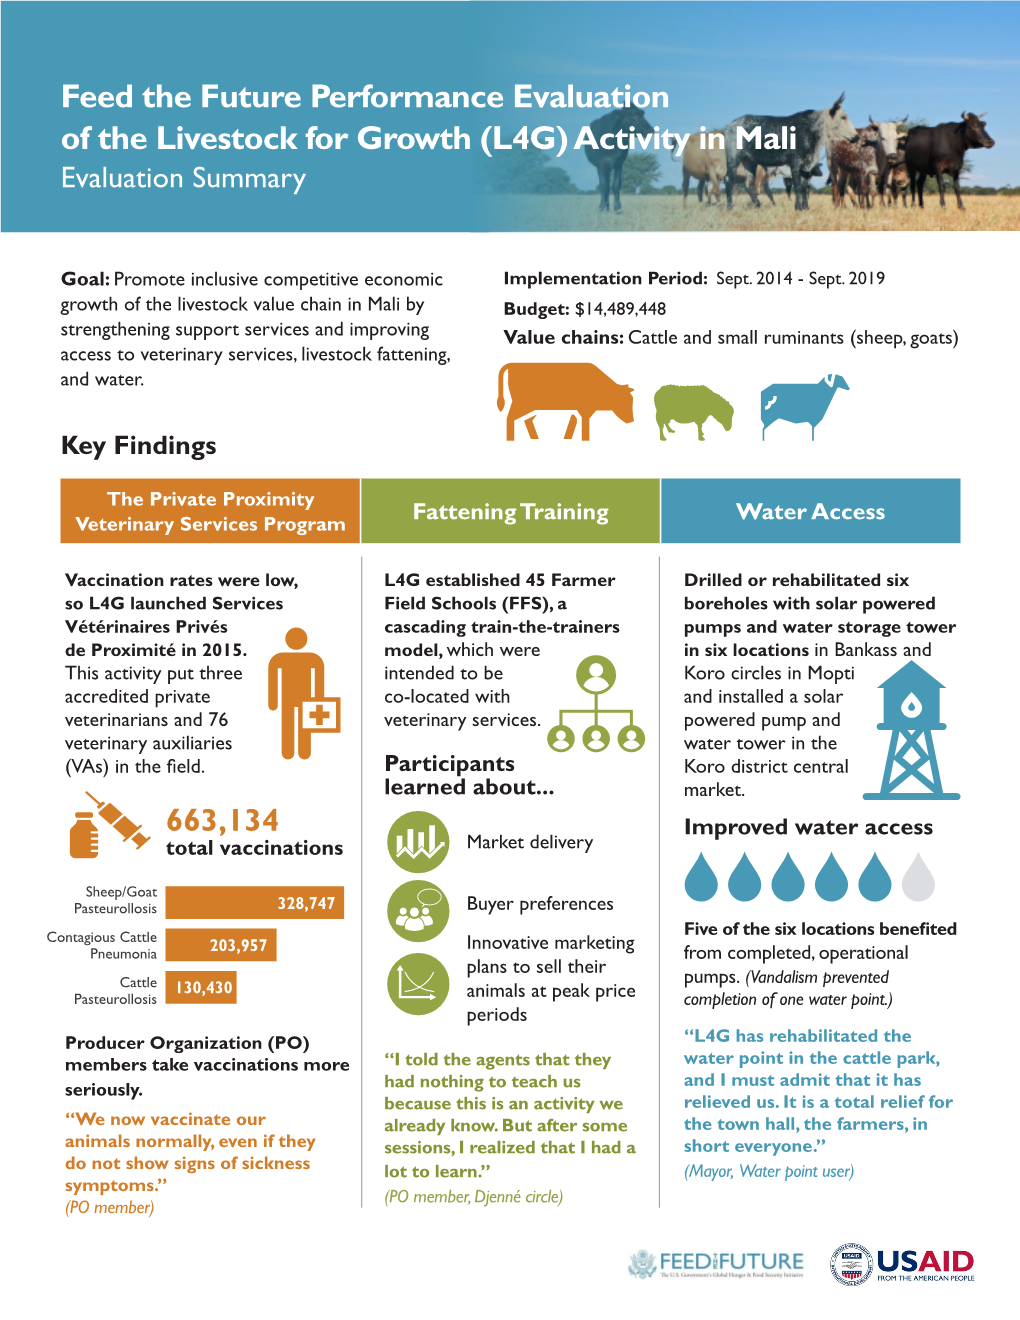 Feed the Future Performance Evaluation of the Livestock for Growth (L4G) Activity in Mali Evaluation Summary